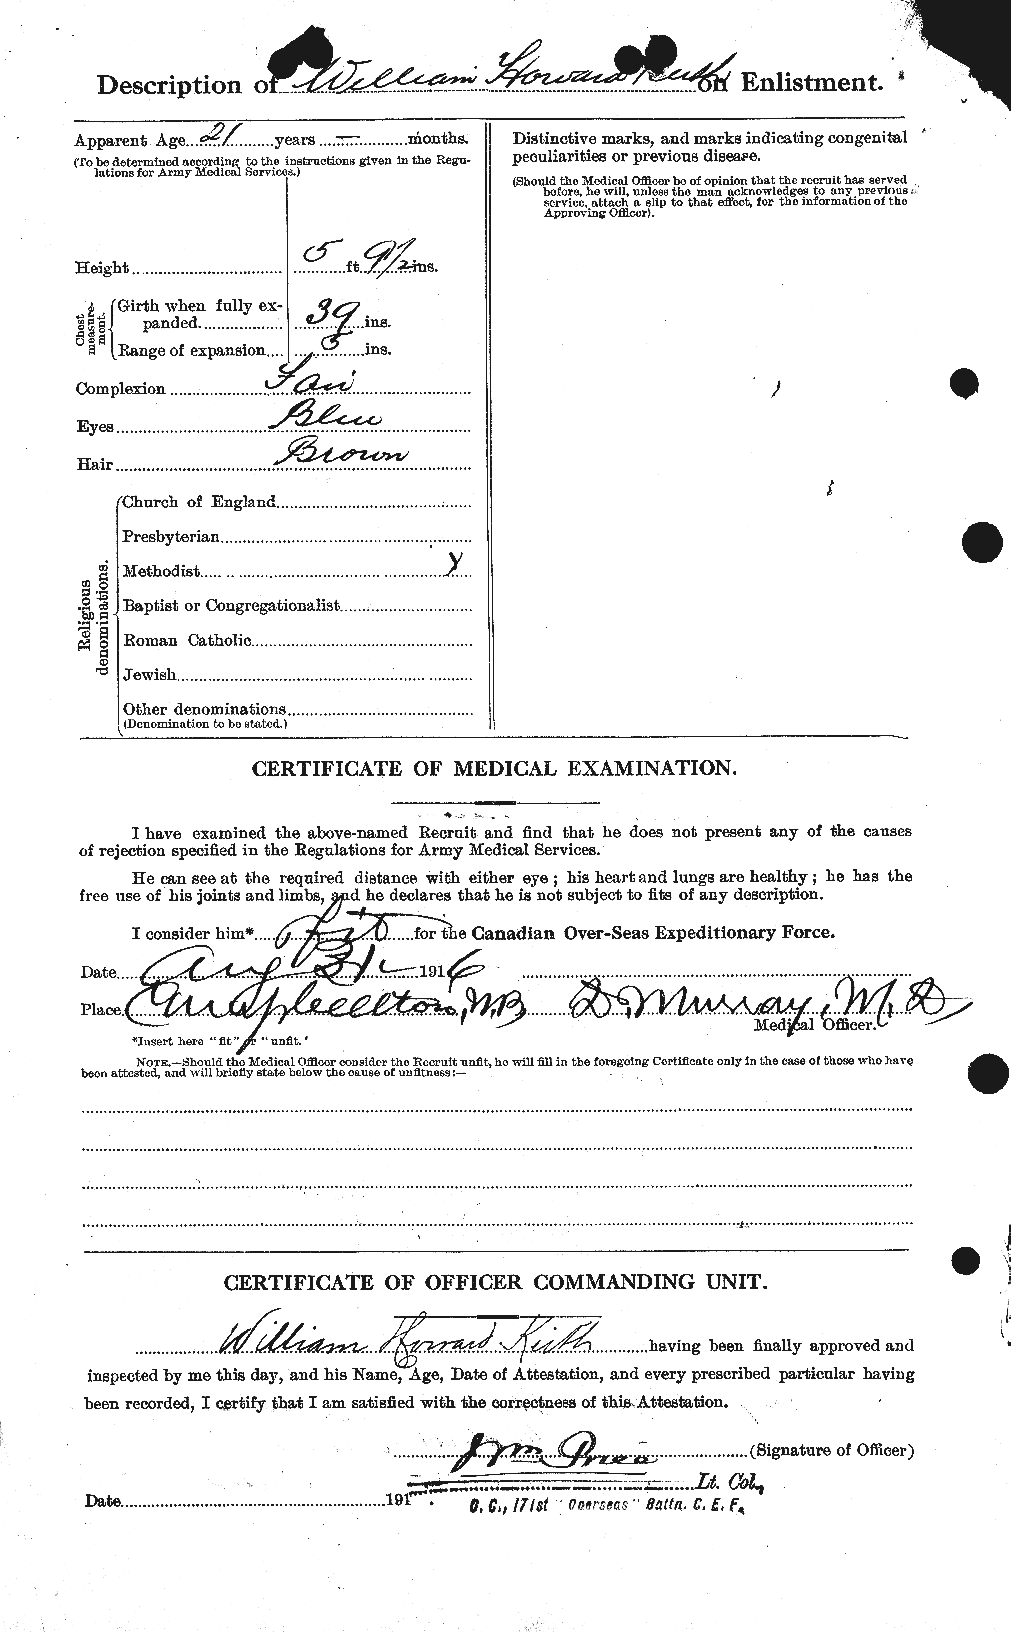 Personnel Records of the First World War - CEF 432518b